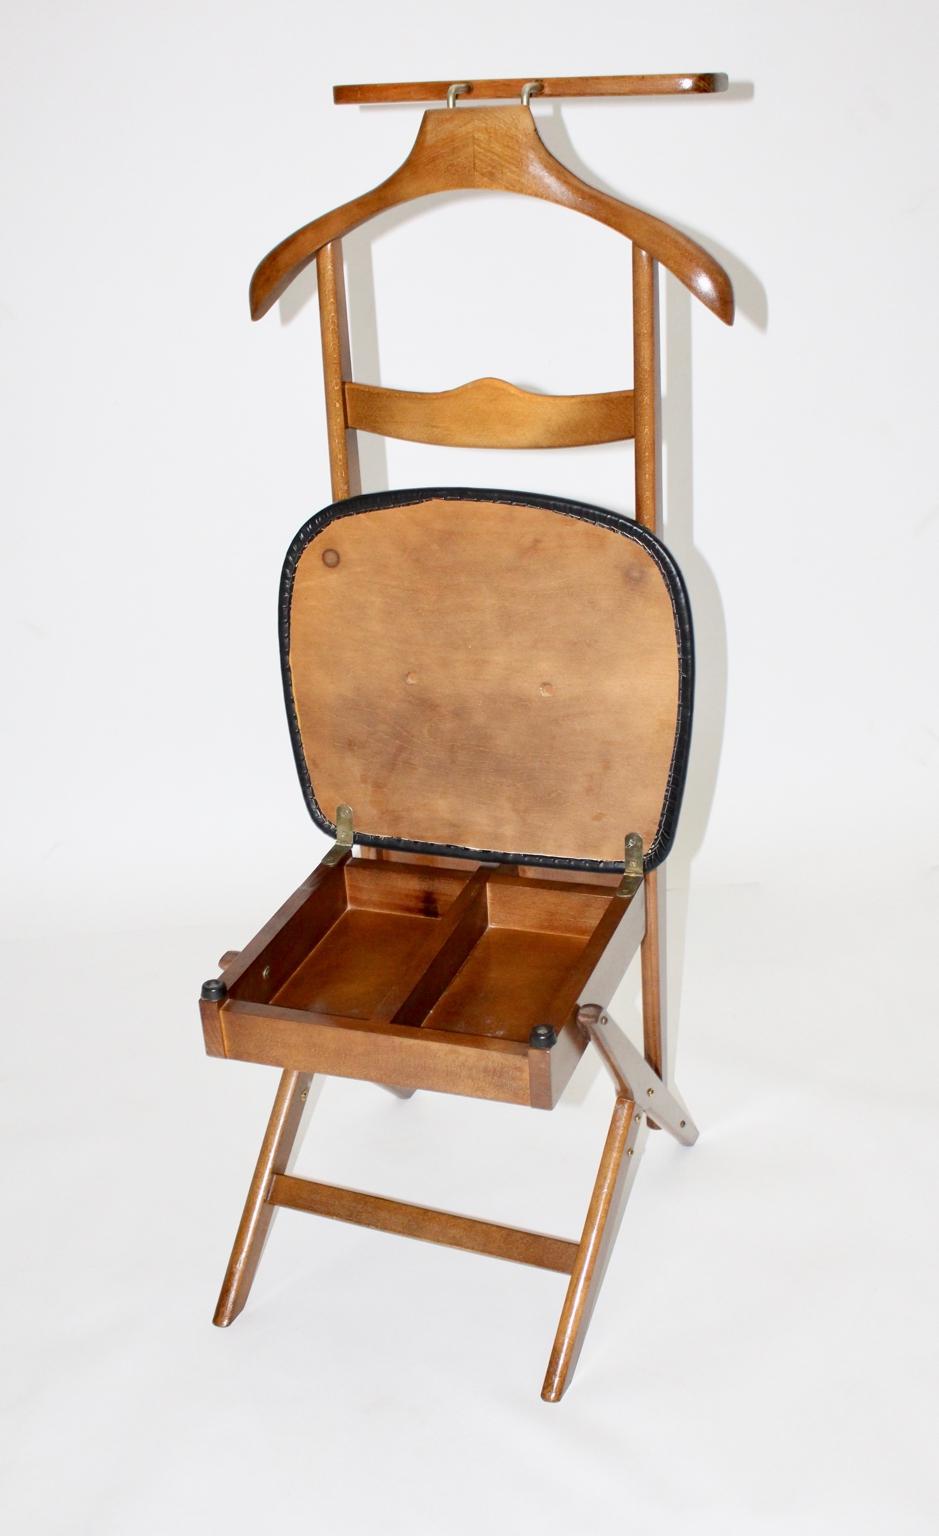 Mid century modern vintage beech valet chair was designed by Ico & Luisa Parisi attributed, Italy, 1960s and executed by Fratelli Reguitti, Italy.
An extraordinary gentlemen valet from plywood, solid beech and brass details.
The seat flap is covered